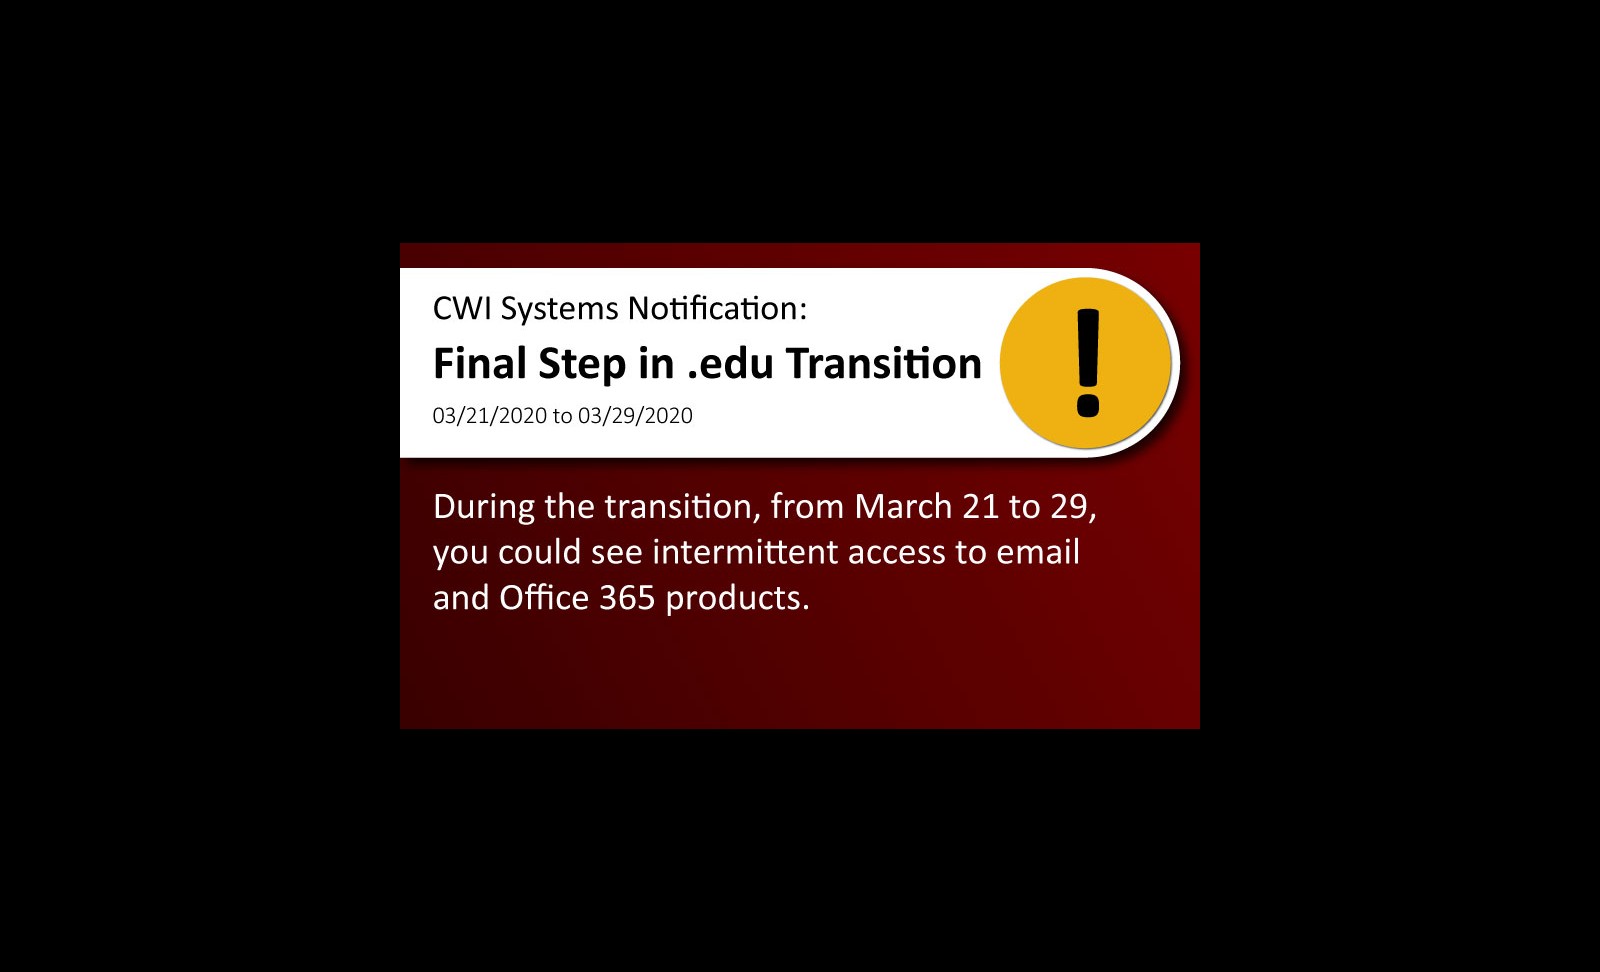 College of Western Idaho will be completing the final step in transitioning to .edu during spring break.